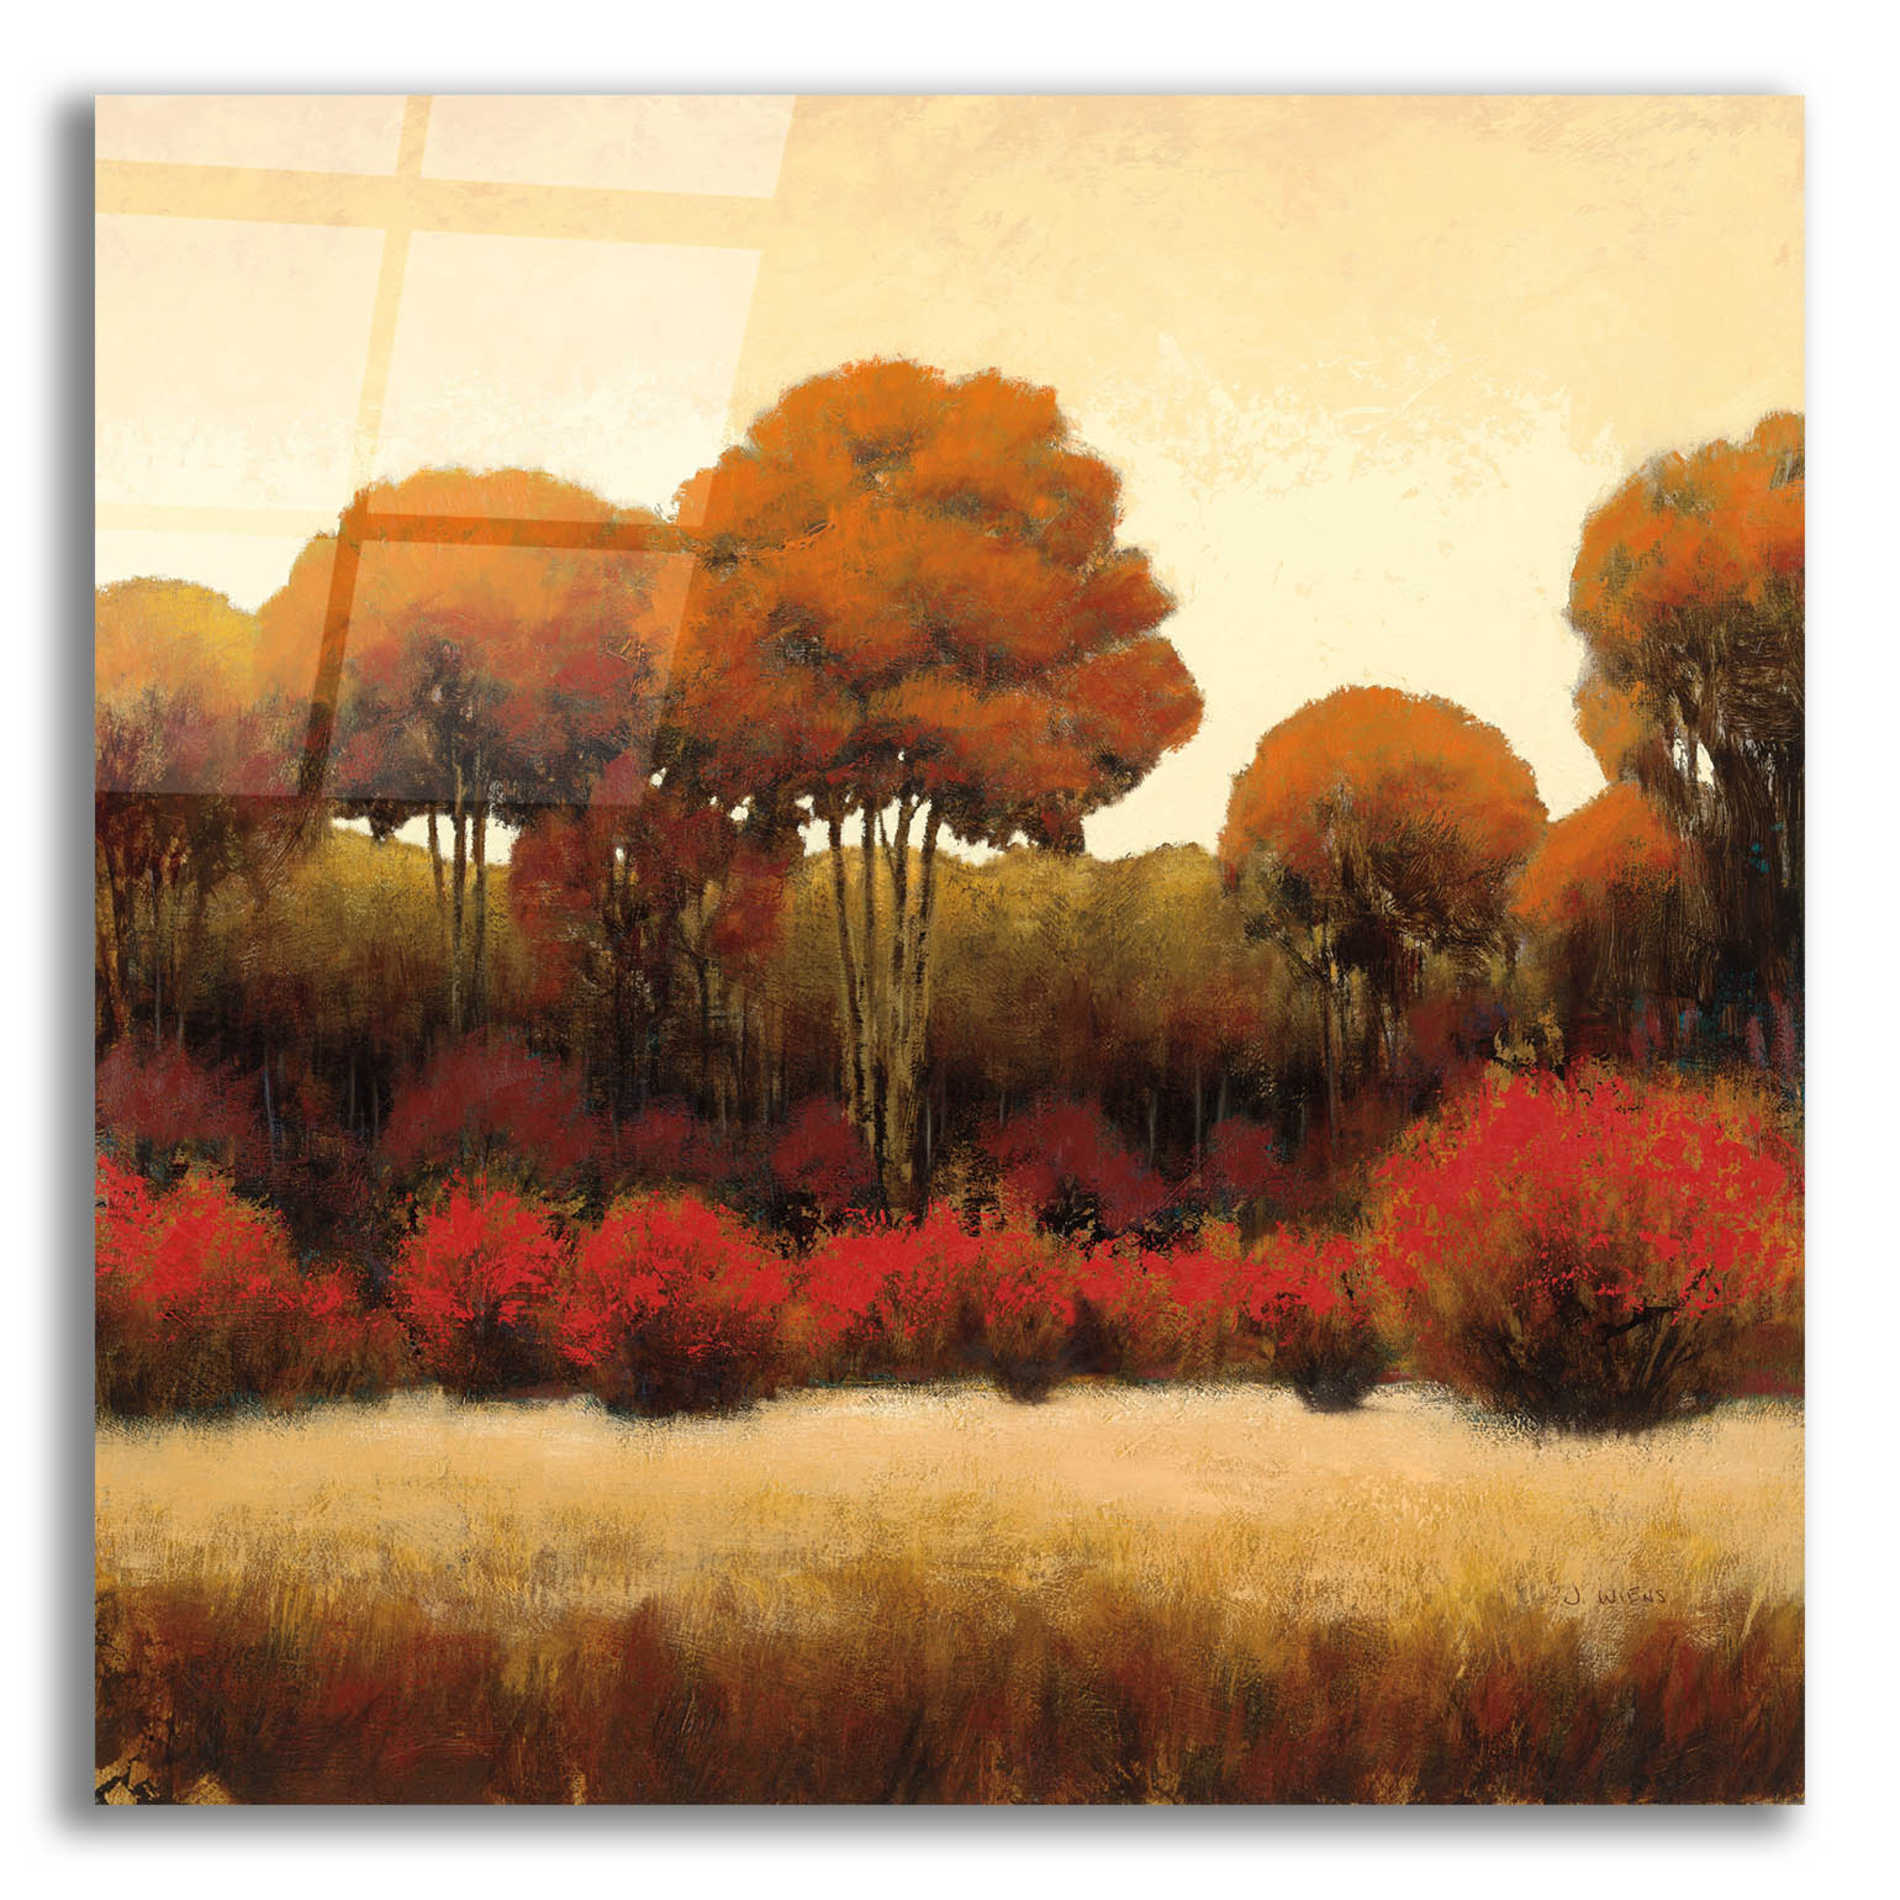 Epic Art 'Autumn Forest II' by James Wiens, Acrylic Glass Wall Art,12x12x1.1x0,18x18x1.1x0,26x26x1.74x0,37x37x1.74x0